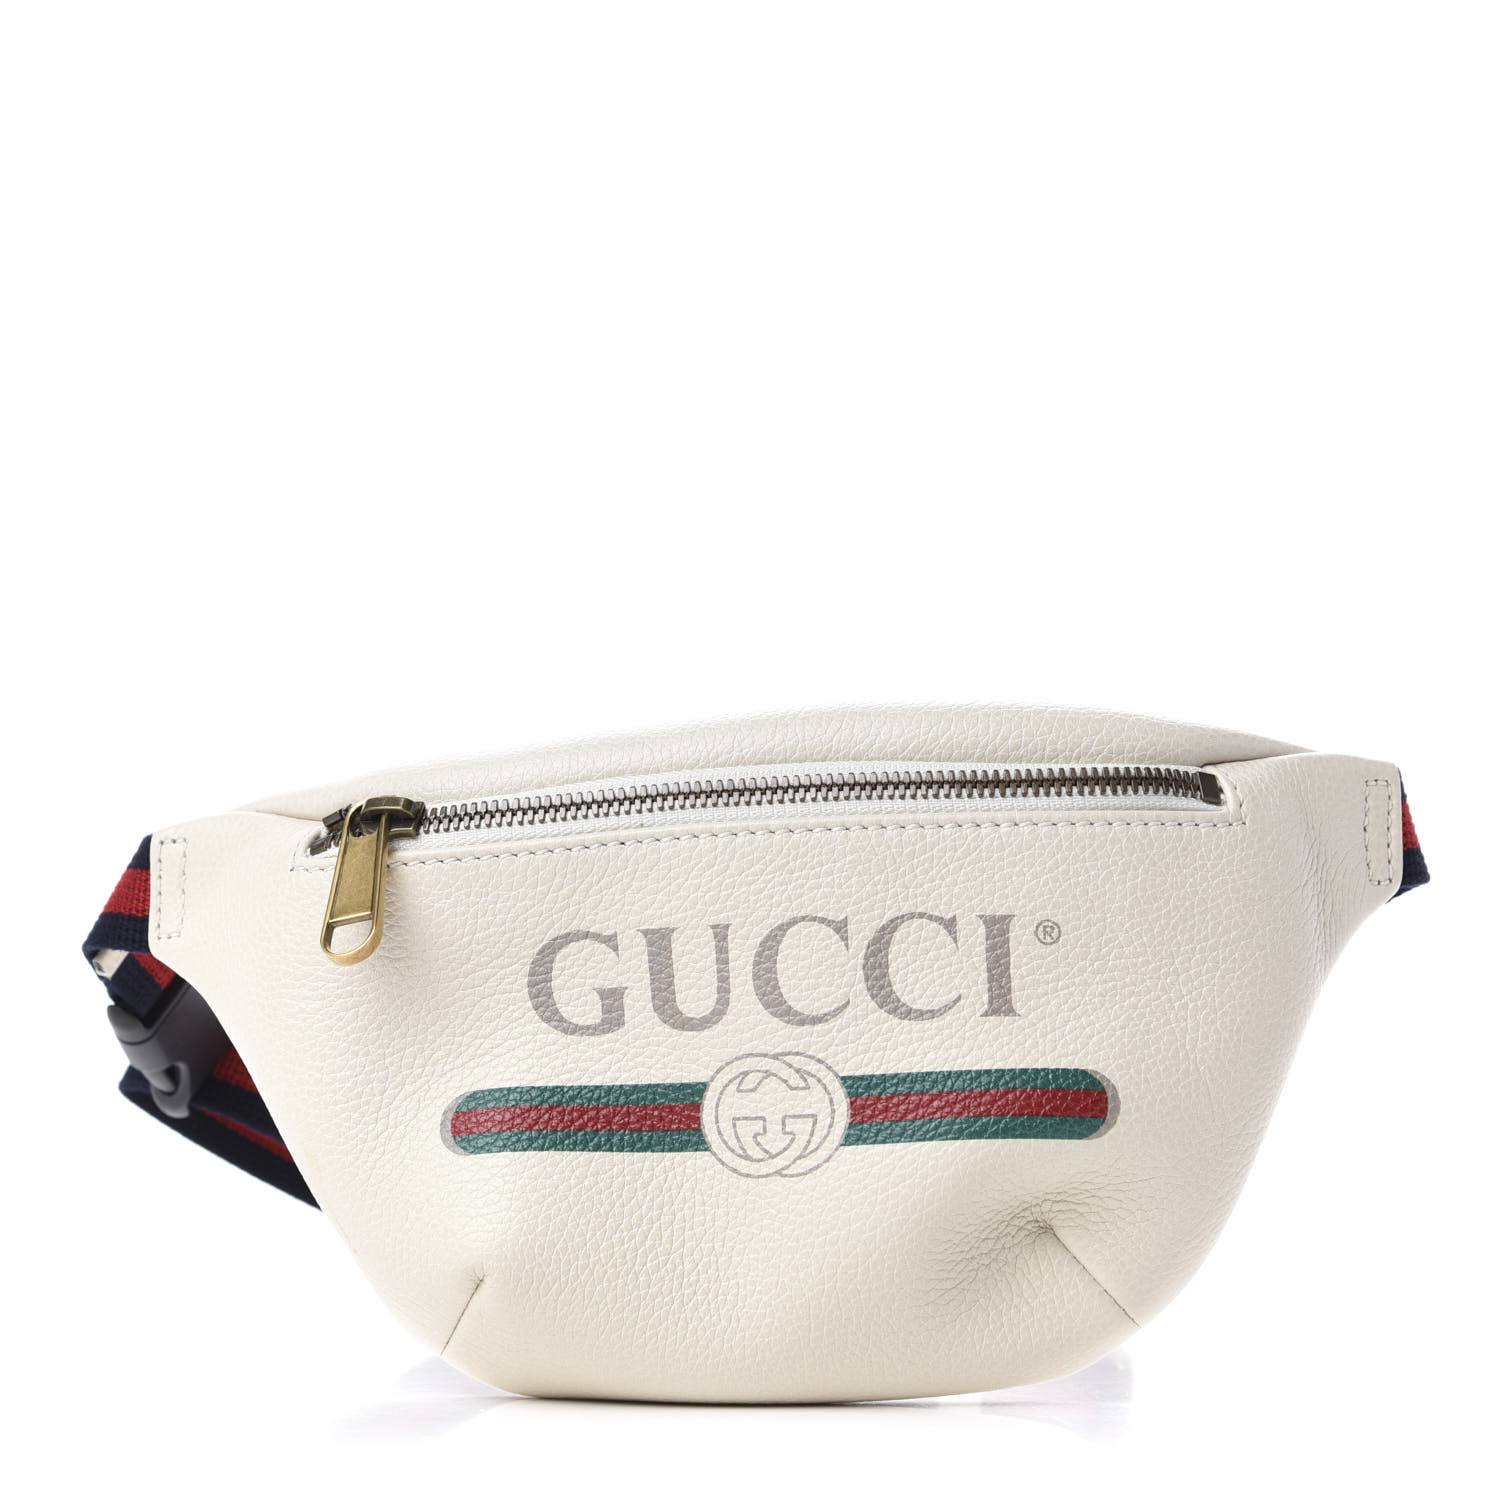 gucci fanny pack white